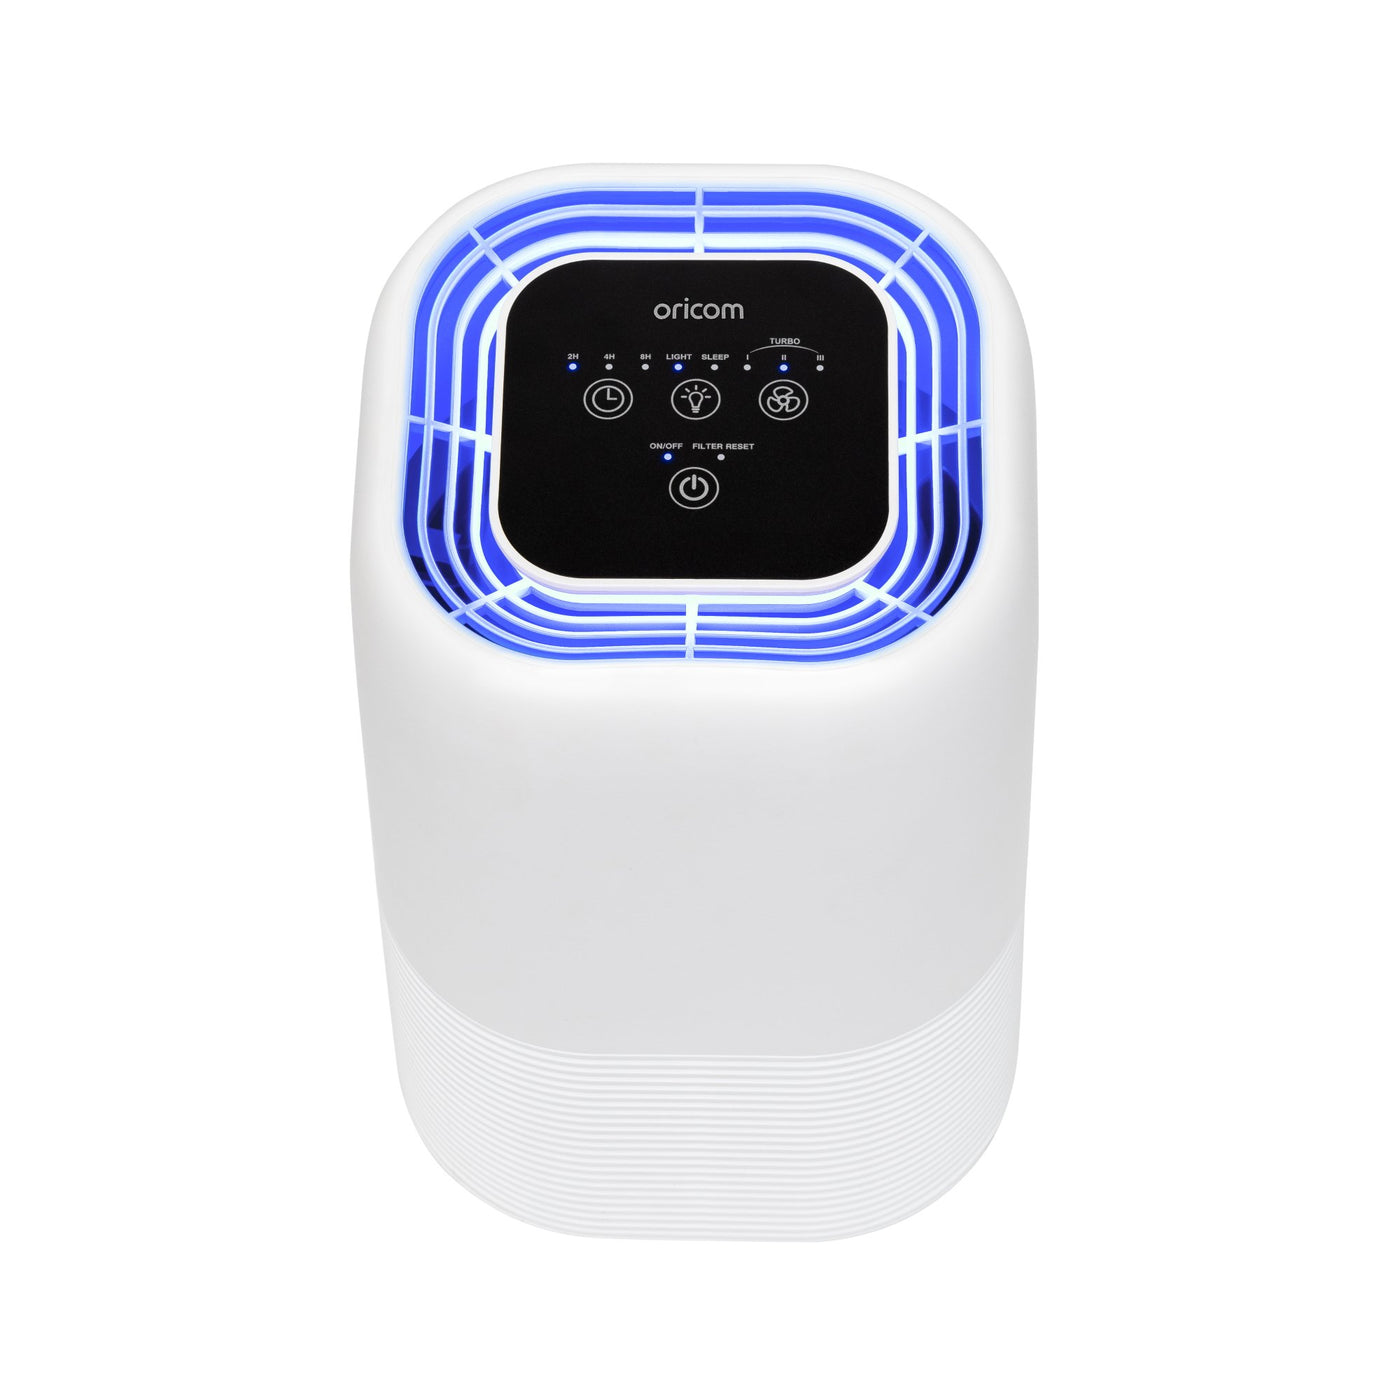 Air Purifier with True HEPA Filter - Belly Beyond 